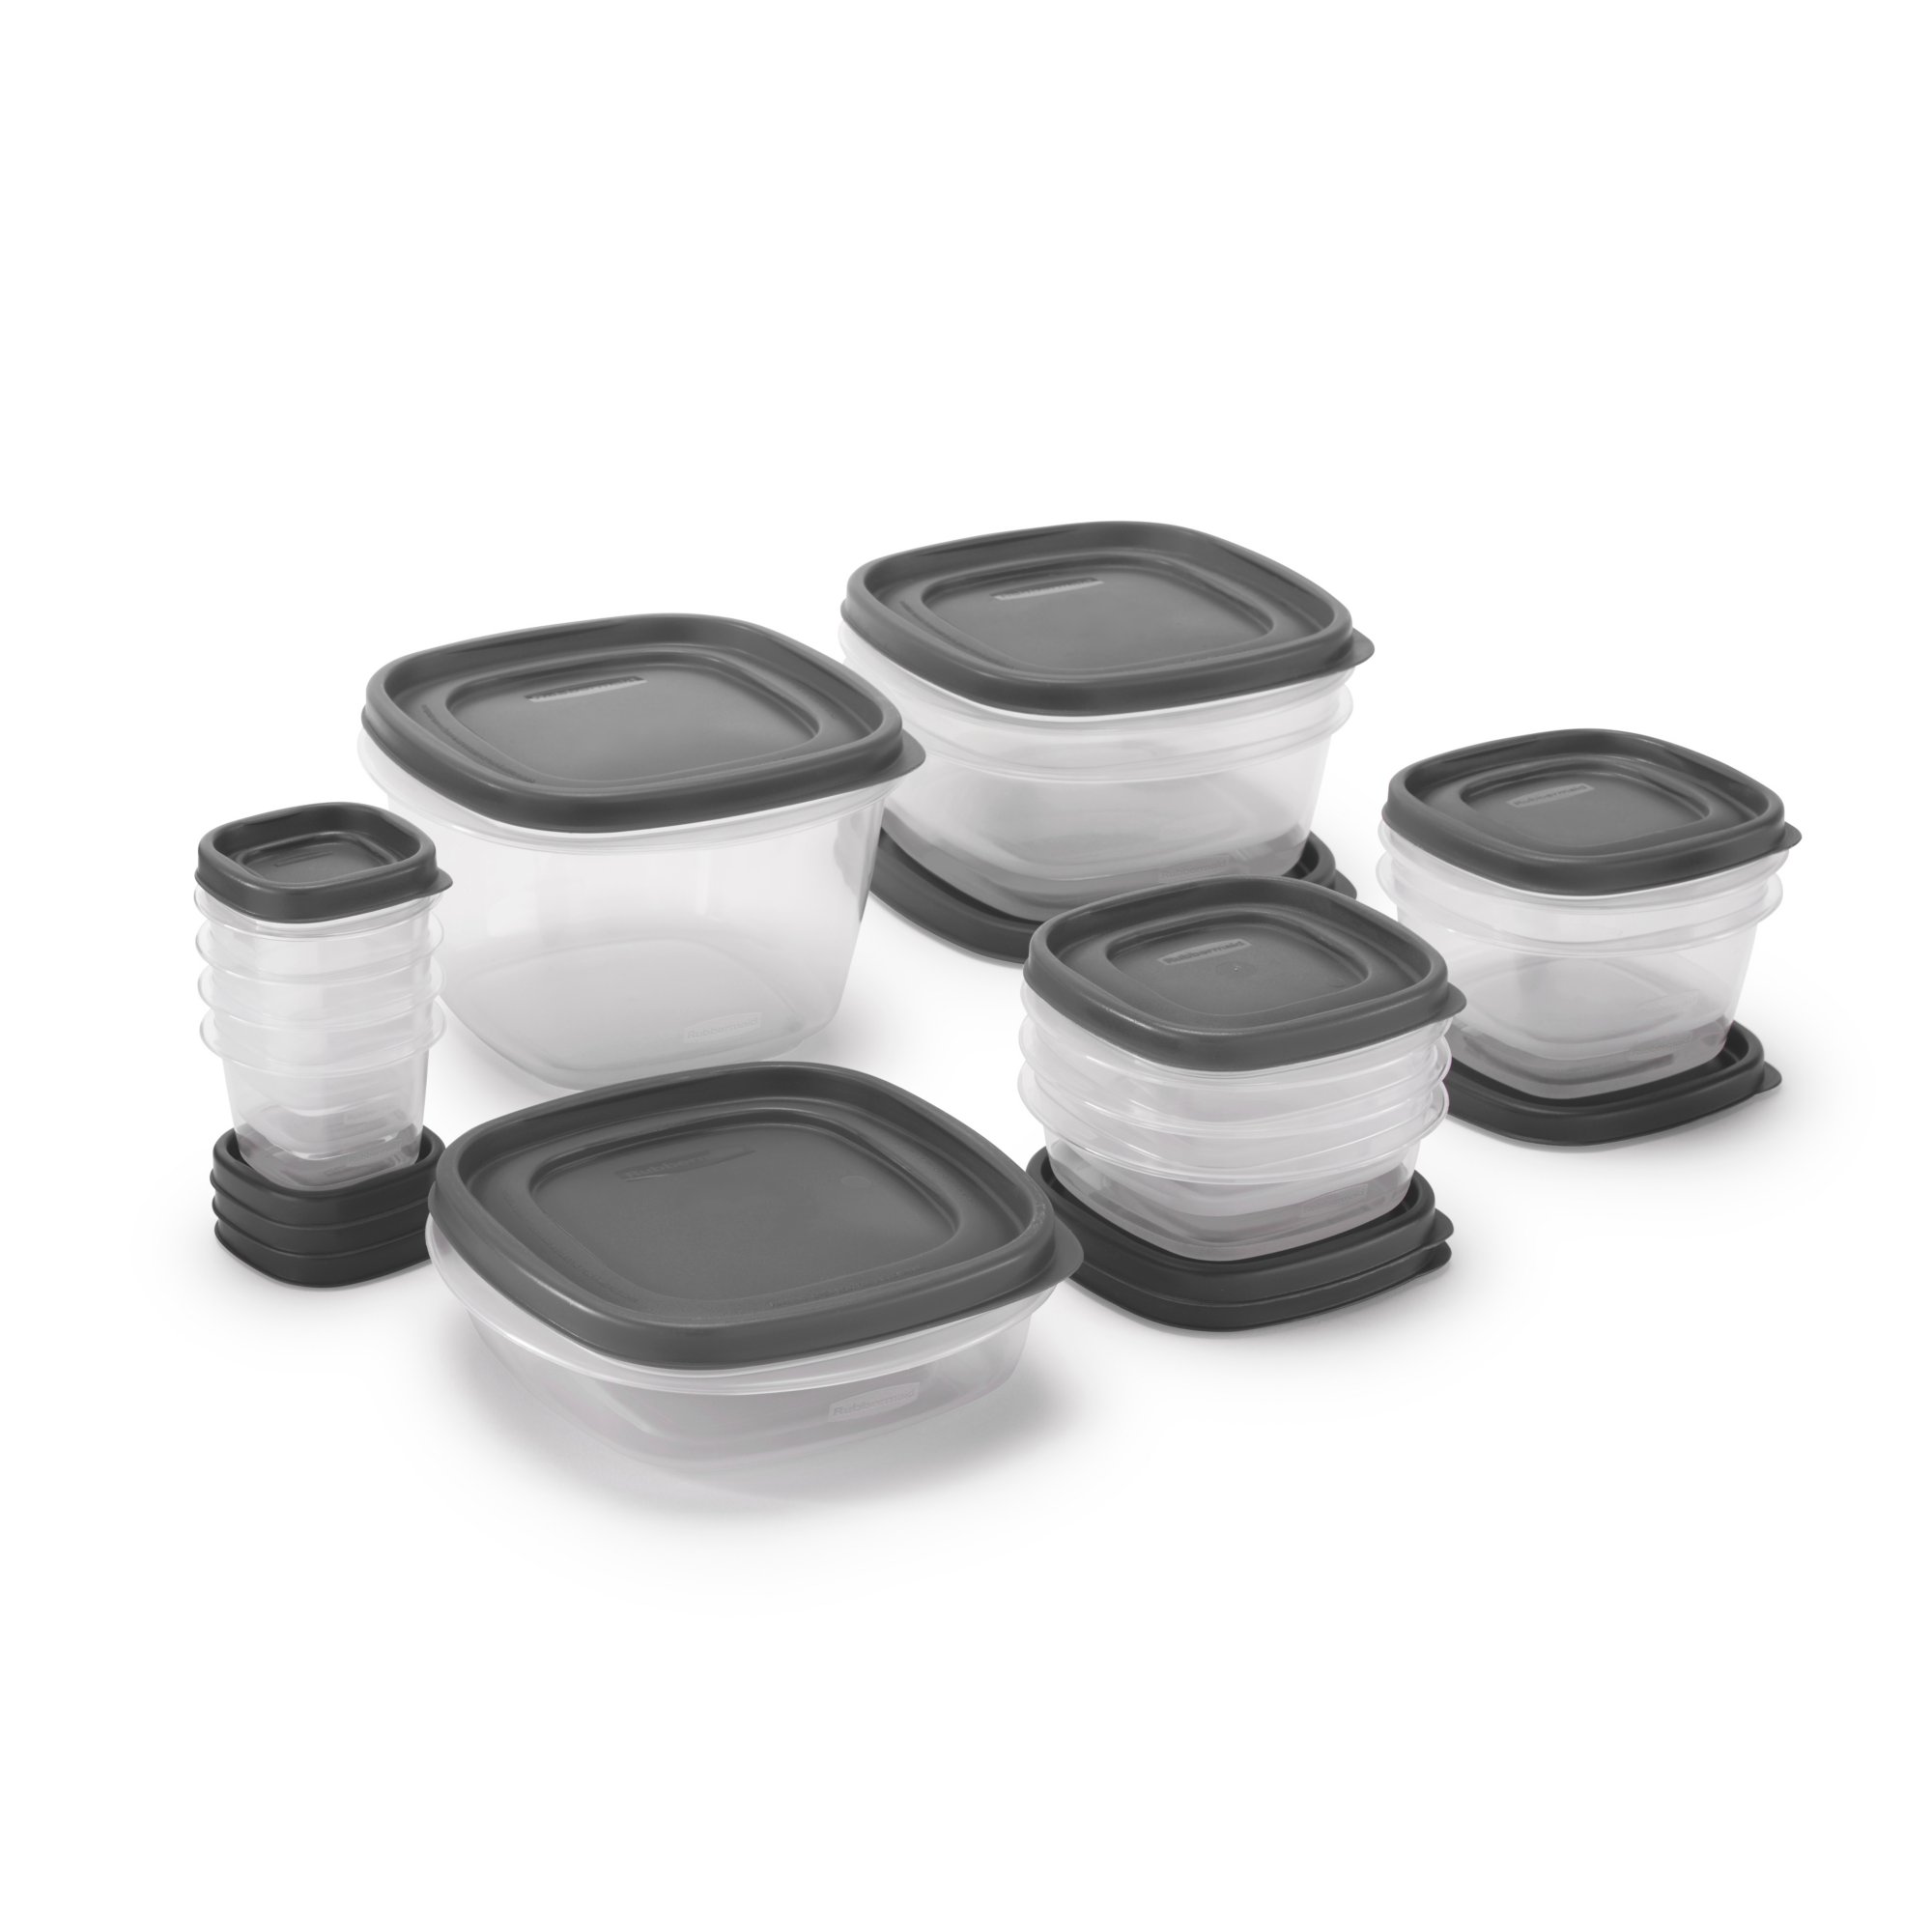 Rubbermaid food storage containers are up to 46 percent off at